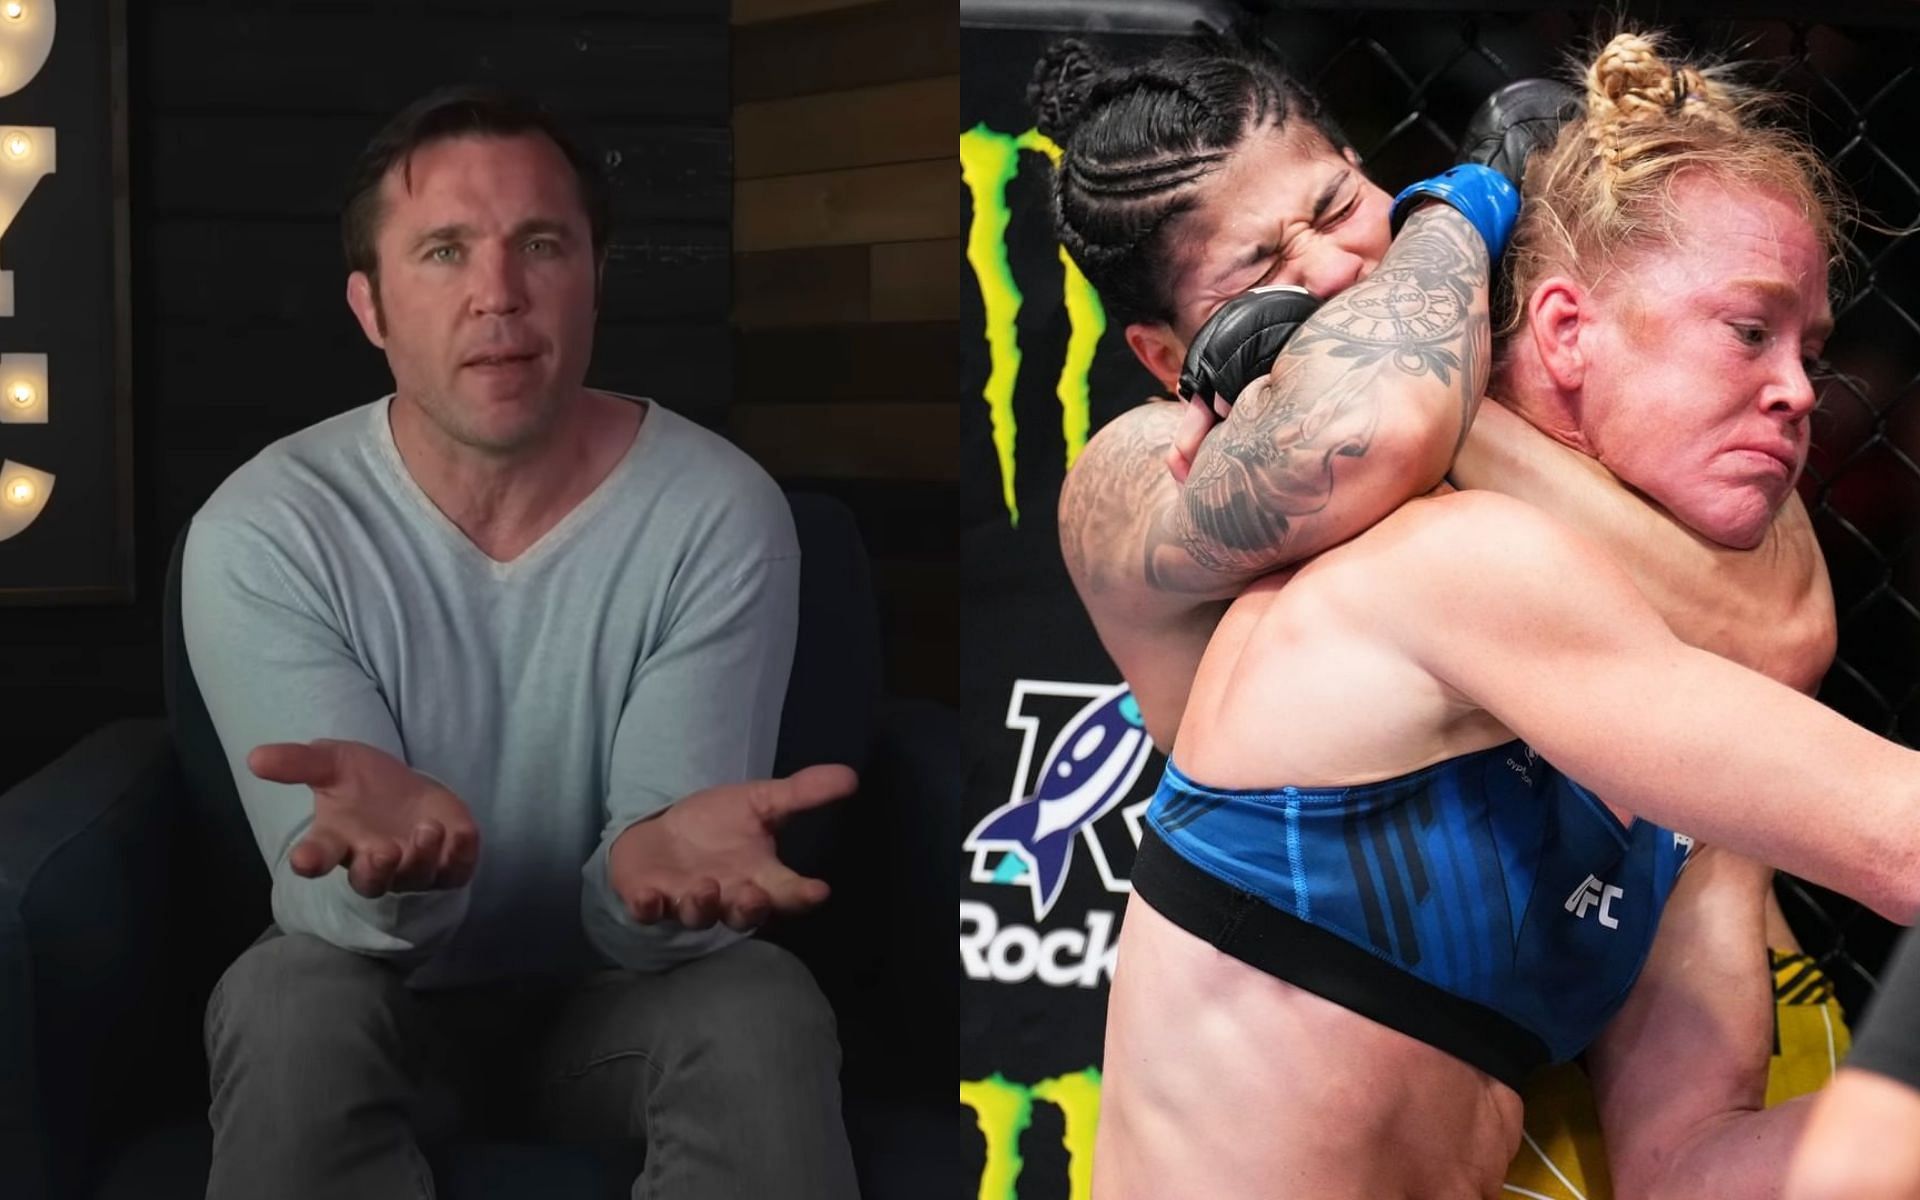 Chael Sonnen (left), Ketlen Vieira and Holly Holm (right) [Images courtesy: Chael Sonnen via YouTube, and @ufc via Instagram]